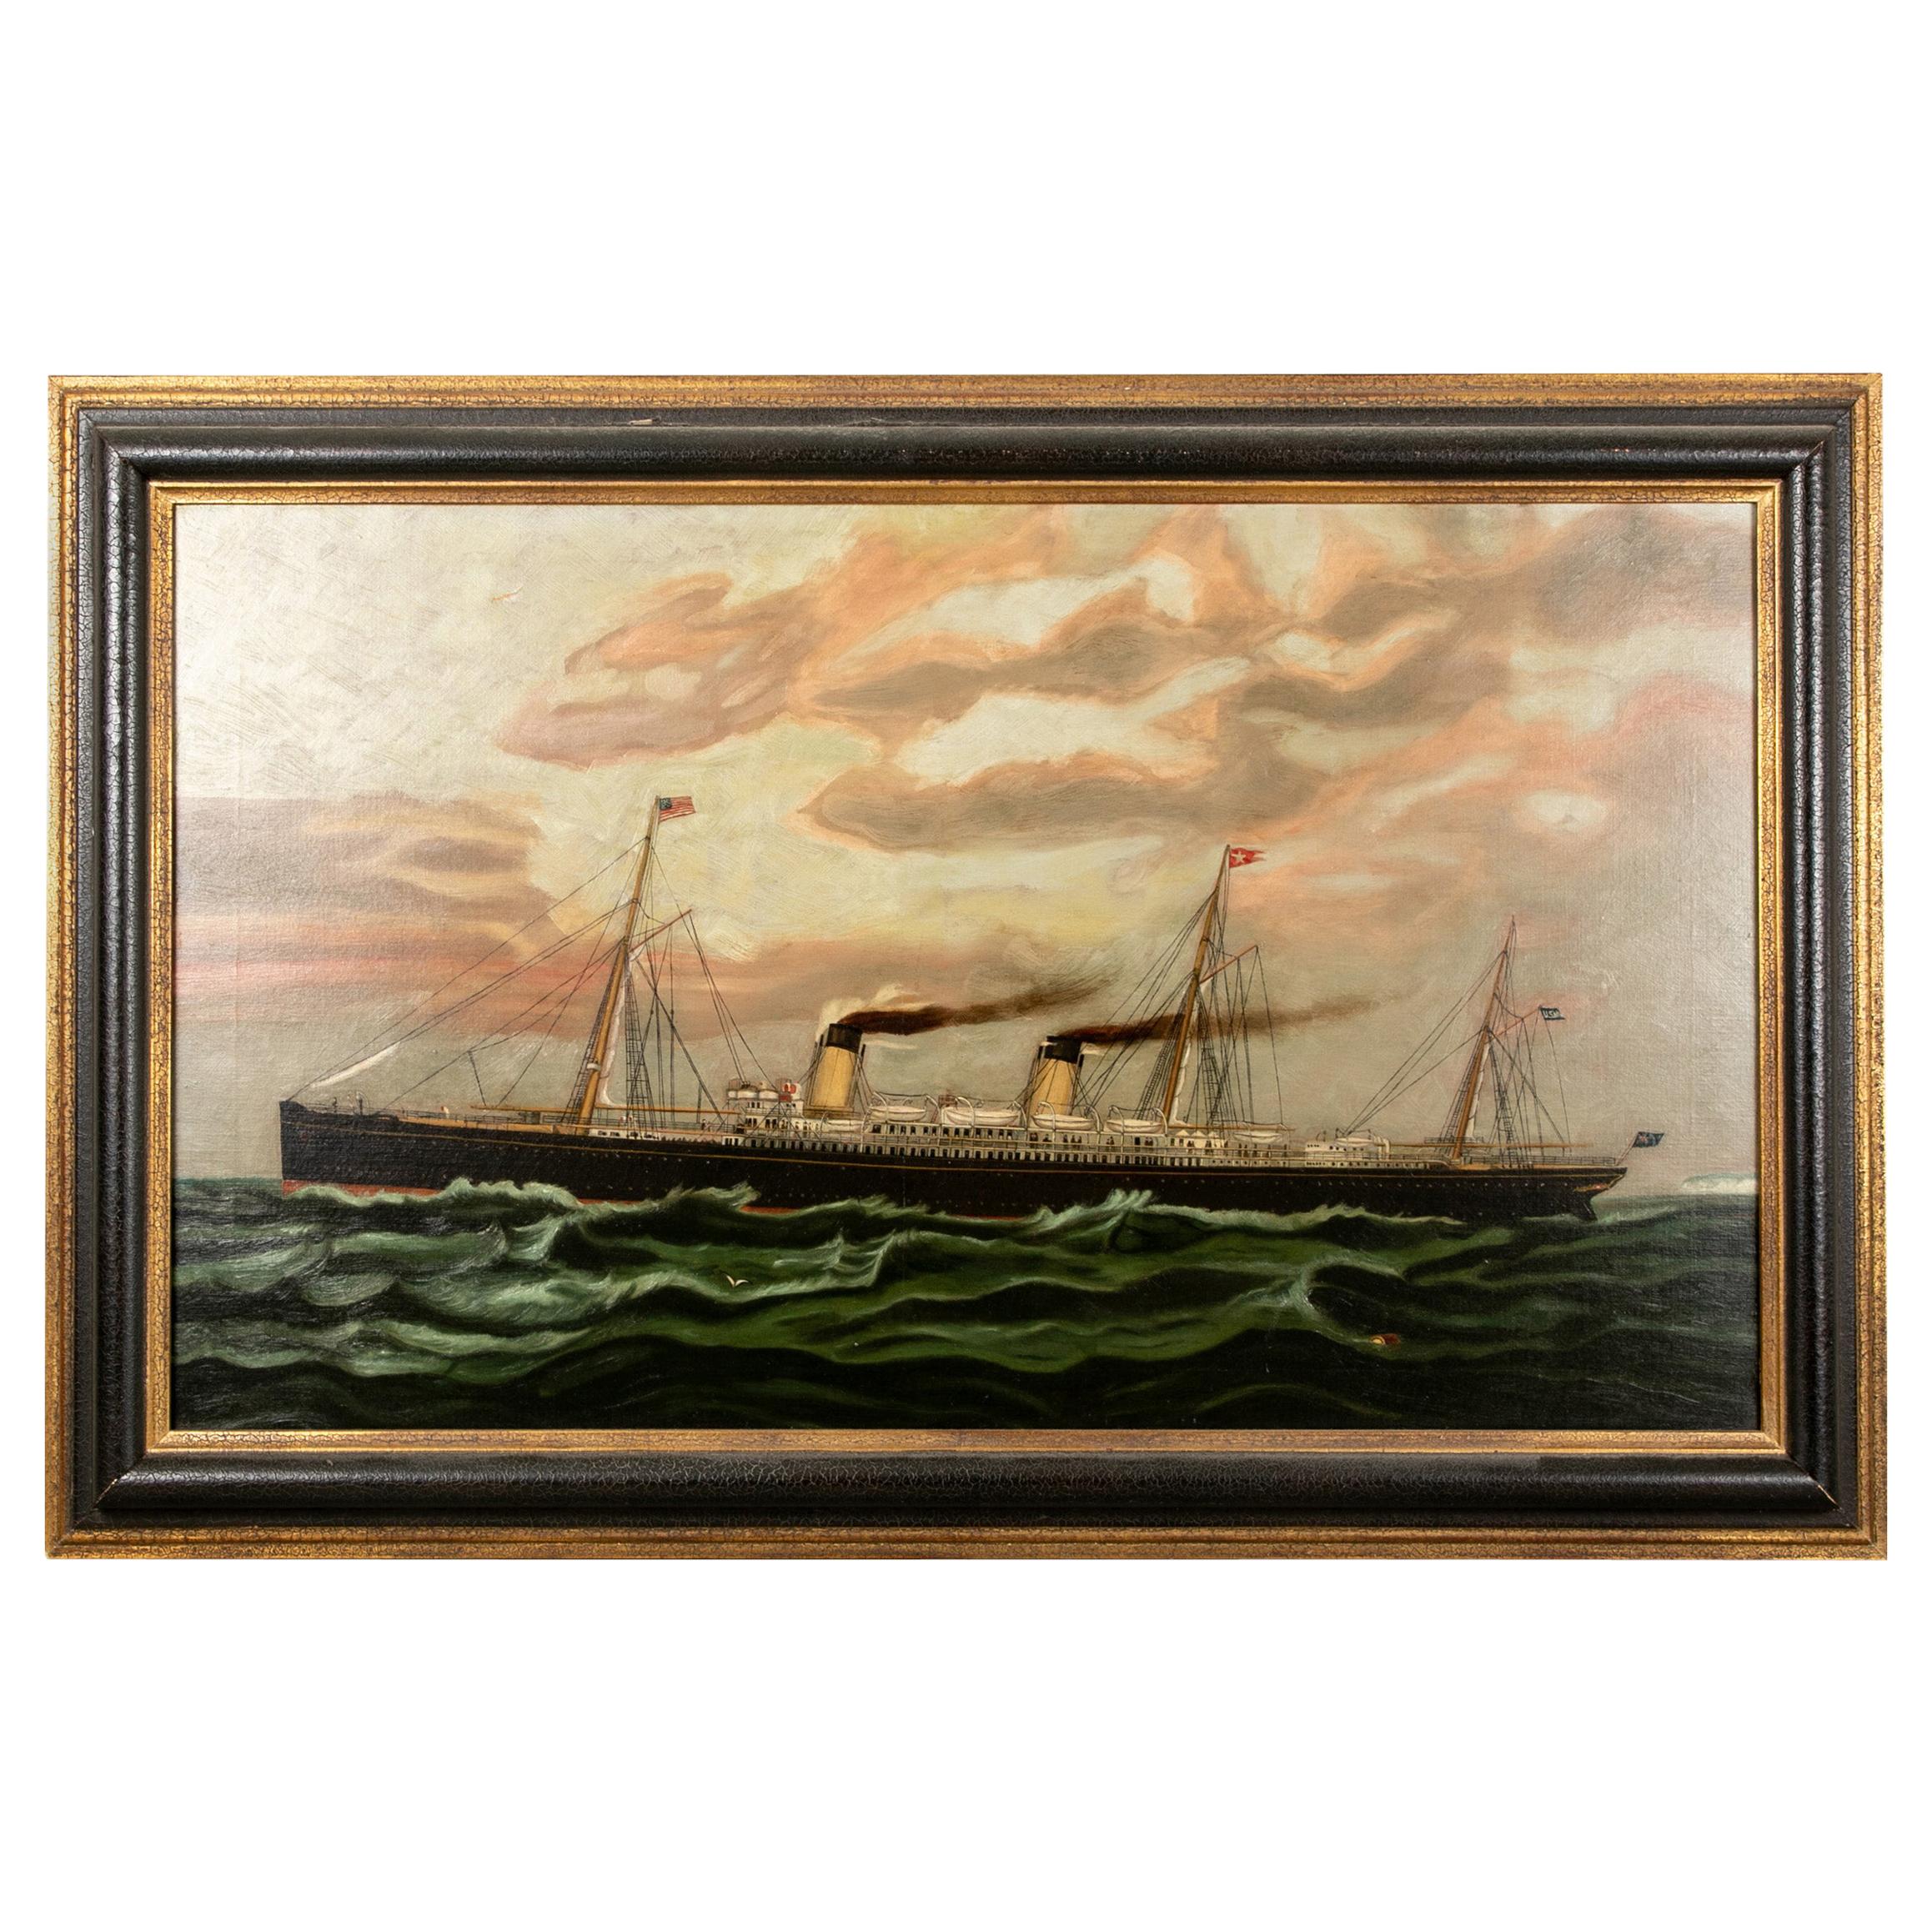 19th Century Oil on Canvas Depicting Mail Steamer Sailing under an Evening Sky